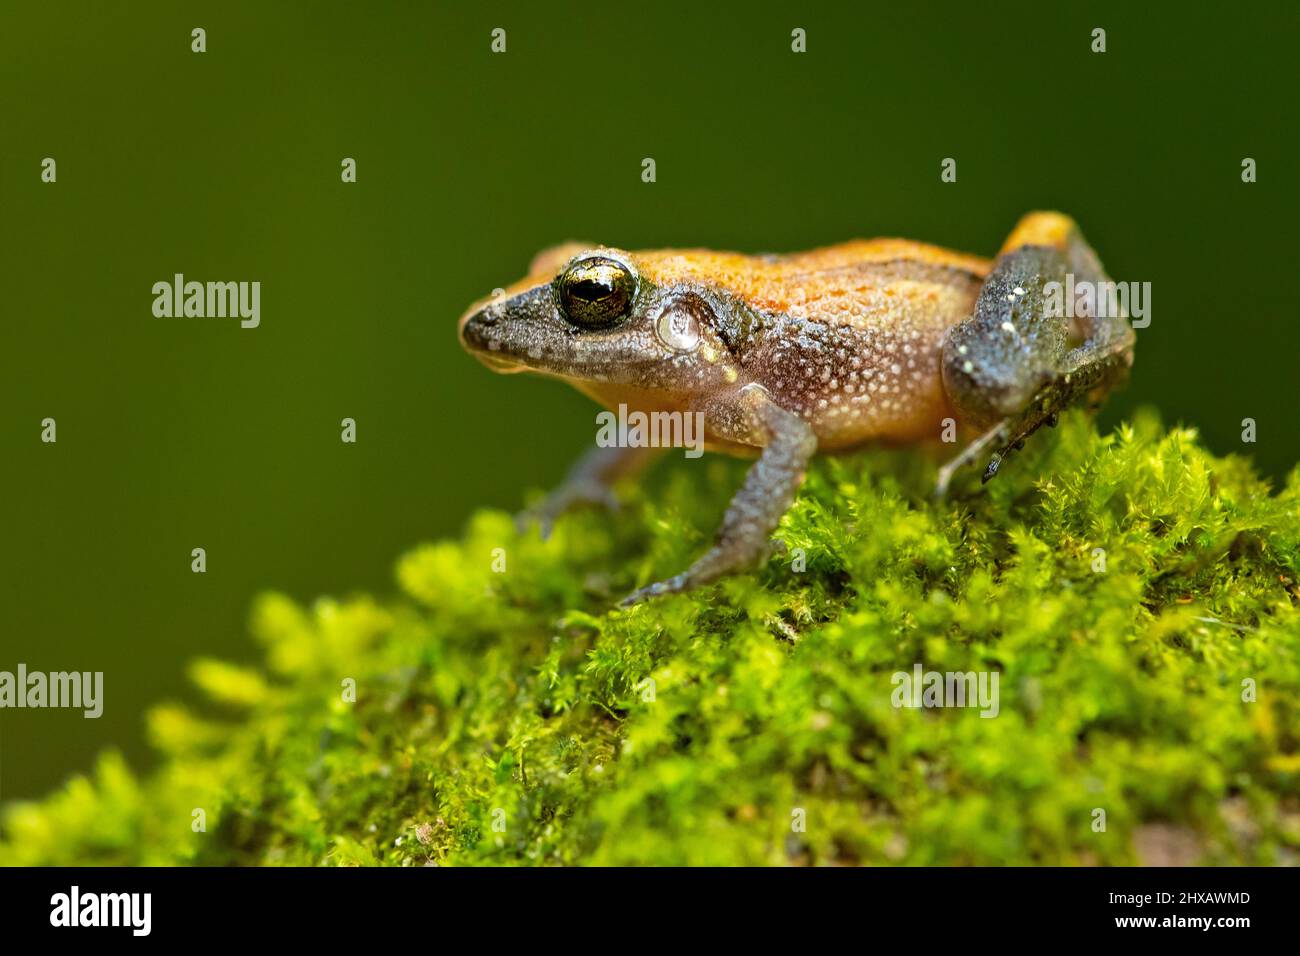 Craugastor stejnegerianus is a species of frog in the family Craugastoridae. It is found in Costa Rica and Panama. Stock Photo